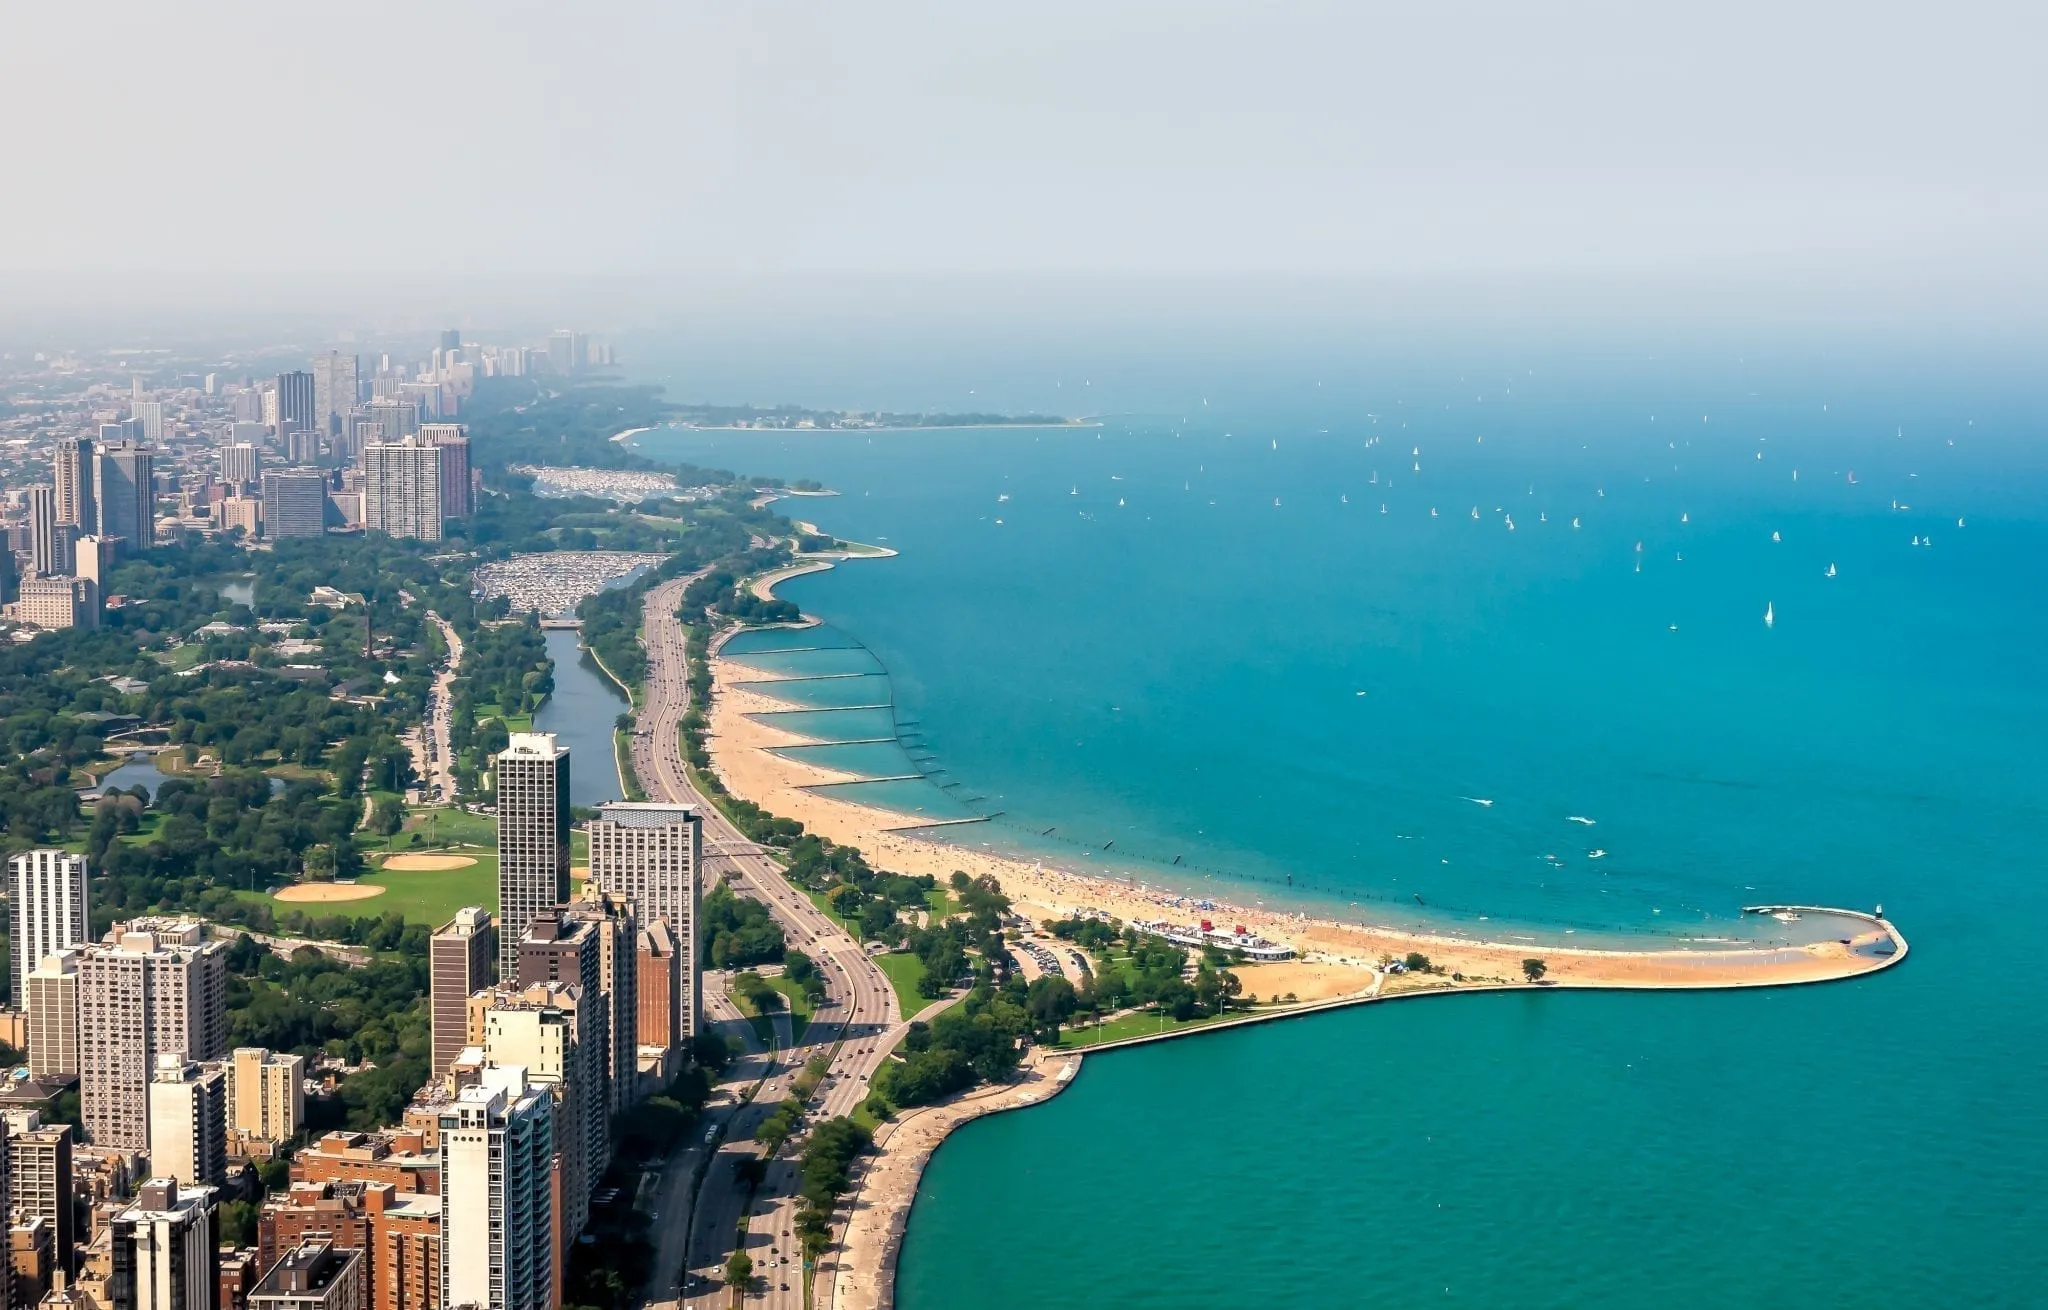 View of Chicago skyline from above with Lake Michigan visible to the right